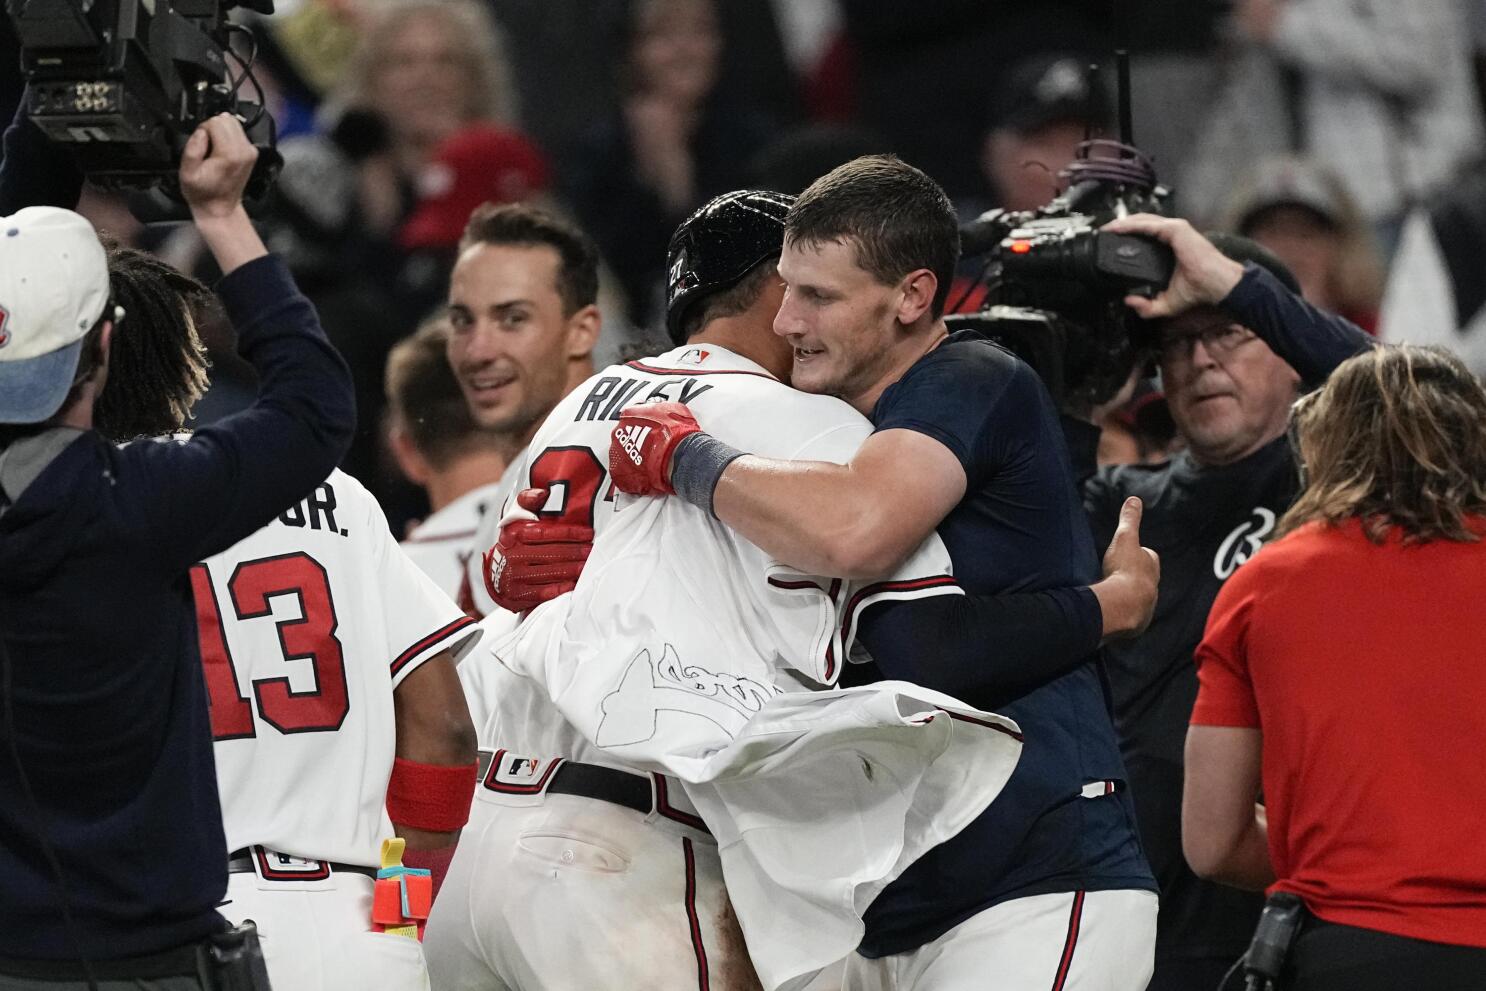 Highlight] Sean Murphy's 3-run homer brings the Braves within five